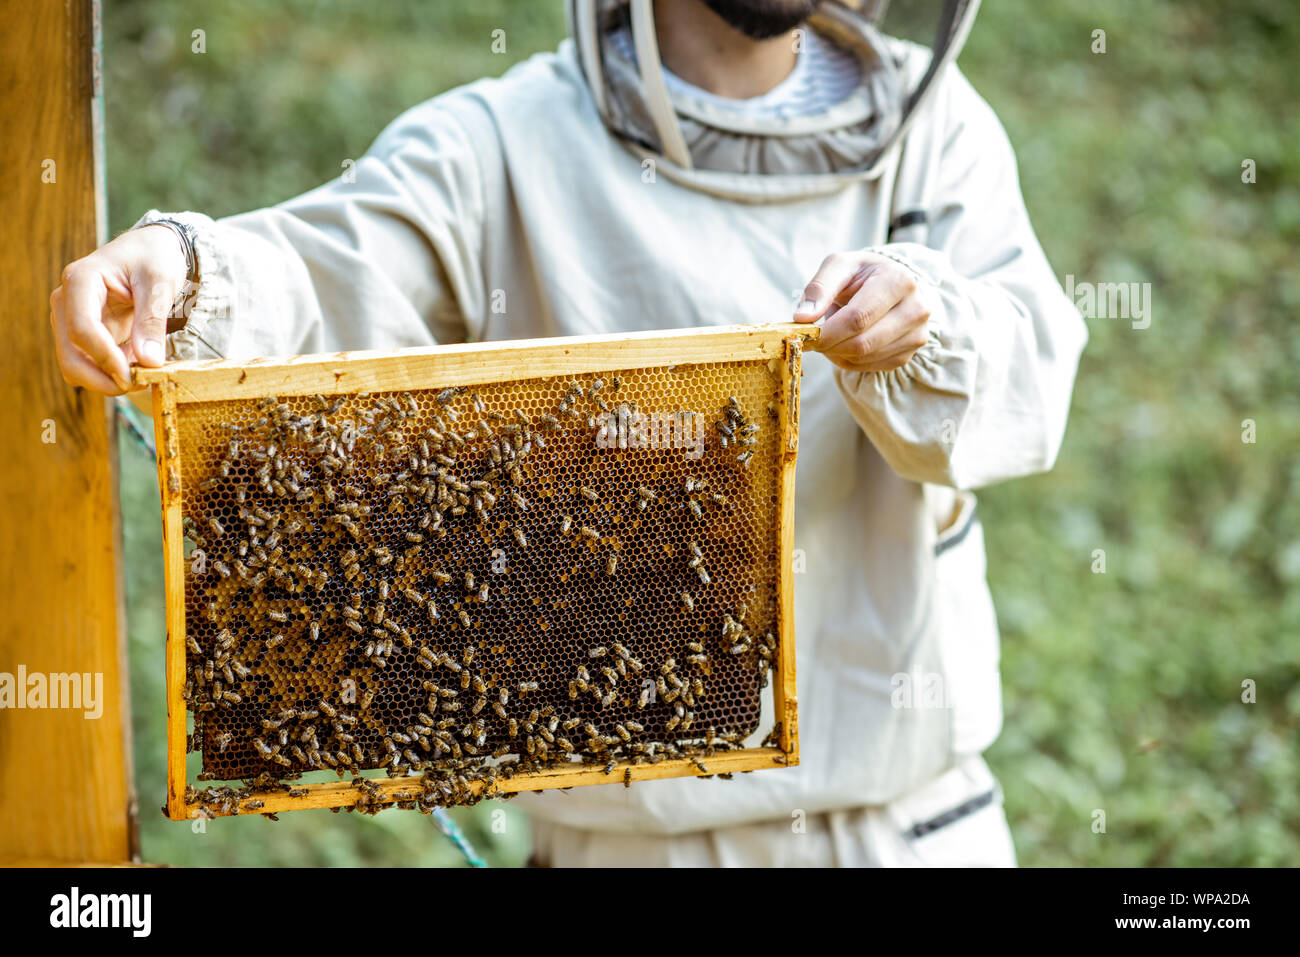 Beekeeper in protective uniform getting honeycombs from the wooden hive, working on the apiary Stock Photo